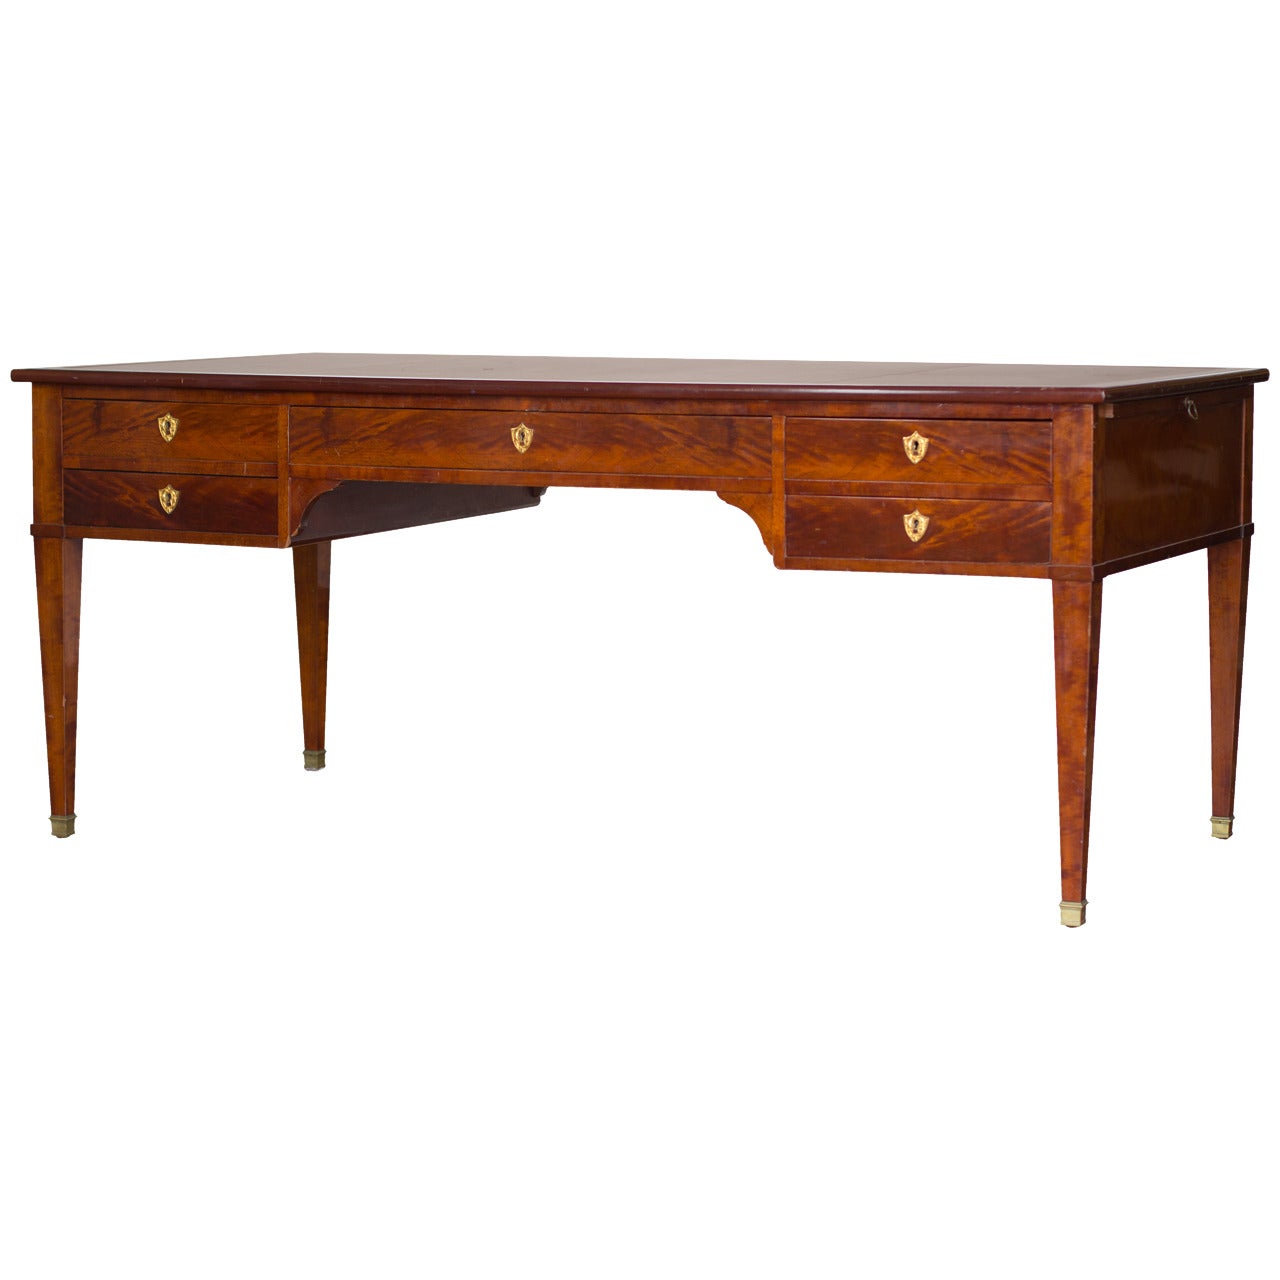 1940 Directoire Style Desk with Inset Leather Top